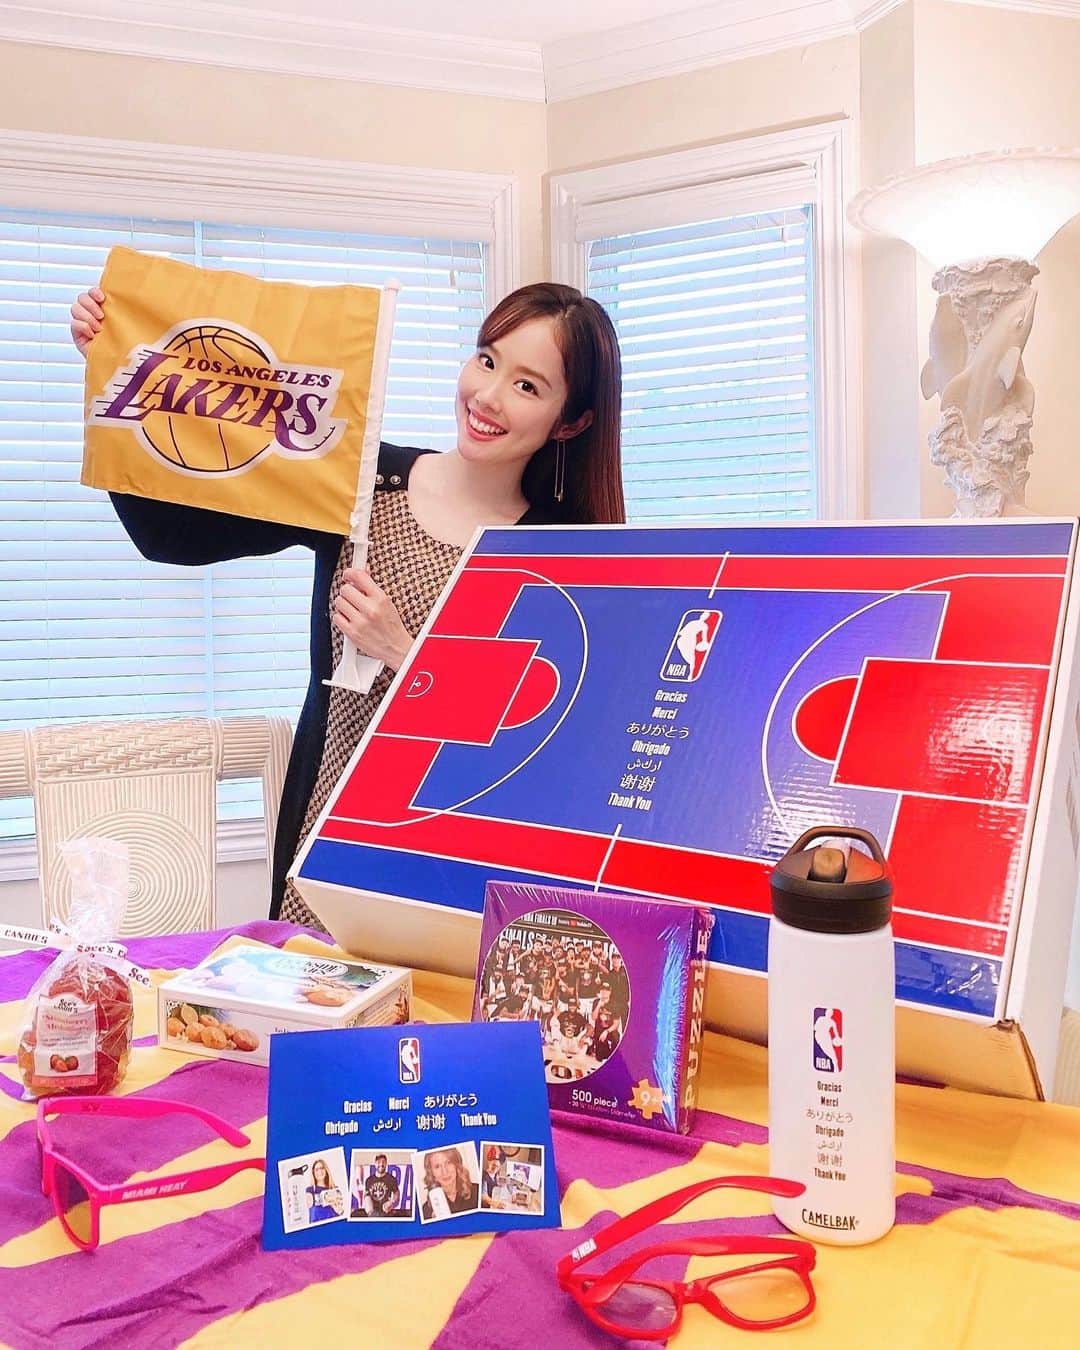 メロディー・モリタさんのインスタグラム写真 - (メロディー・モリタInstagram)「Received wonderful gifts from the @NBA!😆🏀✨ The 2020-2021 season has begun tonight, and all these goodies are going to make me even more pumped for all the NBA action🙌  Kevin Durant made his comeback to an NBA season game for the first time since Game 5 of the 2018-2019 Finals! New head coach and legend Steve Nash shared that "Durant is 90-99% back", and KD certainly proved that with 22pts including his massive dunk against his former team🔥 His Brooklyn Nets debut and Kyrie Irving being on fire definitely got tons of NBA fans up on their feet!  Next up is @lakers VS @laclippers! Being from LA, this is another matchup I've been really looking forward to. Be sure to tune in to the games🙌 I can't wait for all the historical moments to come this season!!✨  Thank you always, @NBA! appreciate the thoughtful gifts and sweet card.☺️❤️  本日2020-2021年シーズンが開幕したNBAから素敵なギフトが届きました！😊🏀✨ 昨シーズン優勝したレイカーズのグッズなど、多くのNBAアイテムに触れると本当に気分が上がります🙌  オープニングナイトの第一戦では、18-19年シーズンのNBAファイナル第5戦以来の公式戦 復帰となったケビン・デュラント選手がブルックリン・ネッツ デビュー！  新コーチとなったNBAレジェンドのスティーブ・ナッシュさんも試合前から「KDは90~99%復活した」と語っていましたが、 その言葉通り、前所属チームのウォリアーズに対し、KDは豪快なダンクを含む22得点をマークしました‼️カイリー・アービング選手と共に、NBAファンの気持ちが昂る活躍でした👏  続いて、オープニングナイト二戦目となるレイカーズVSクリッパーズはLA対決！私はLA出身なので、こちらのハイレベルゲームも目が離せません👀🔥  NBAはきっと、今シーズンも様々な感動的な試合を私たちに見せてくれるはず✨✨ 皆さんも是非一緒に盛り上がって、楽しんでくださいね！😆 #NBA #NBAOpeningNight #NBAJerseyDay #Interviews #KevinDurant #KyrieIrving #StephenCurry #LeBronJames #Lakers #MelodeeMoritaInterviews」12月23日 11時59分 - melodeemorita